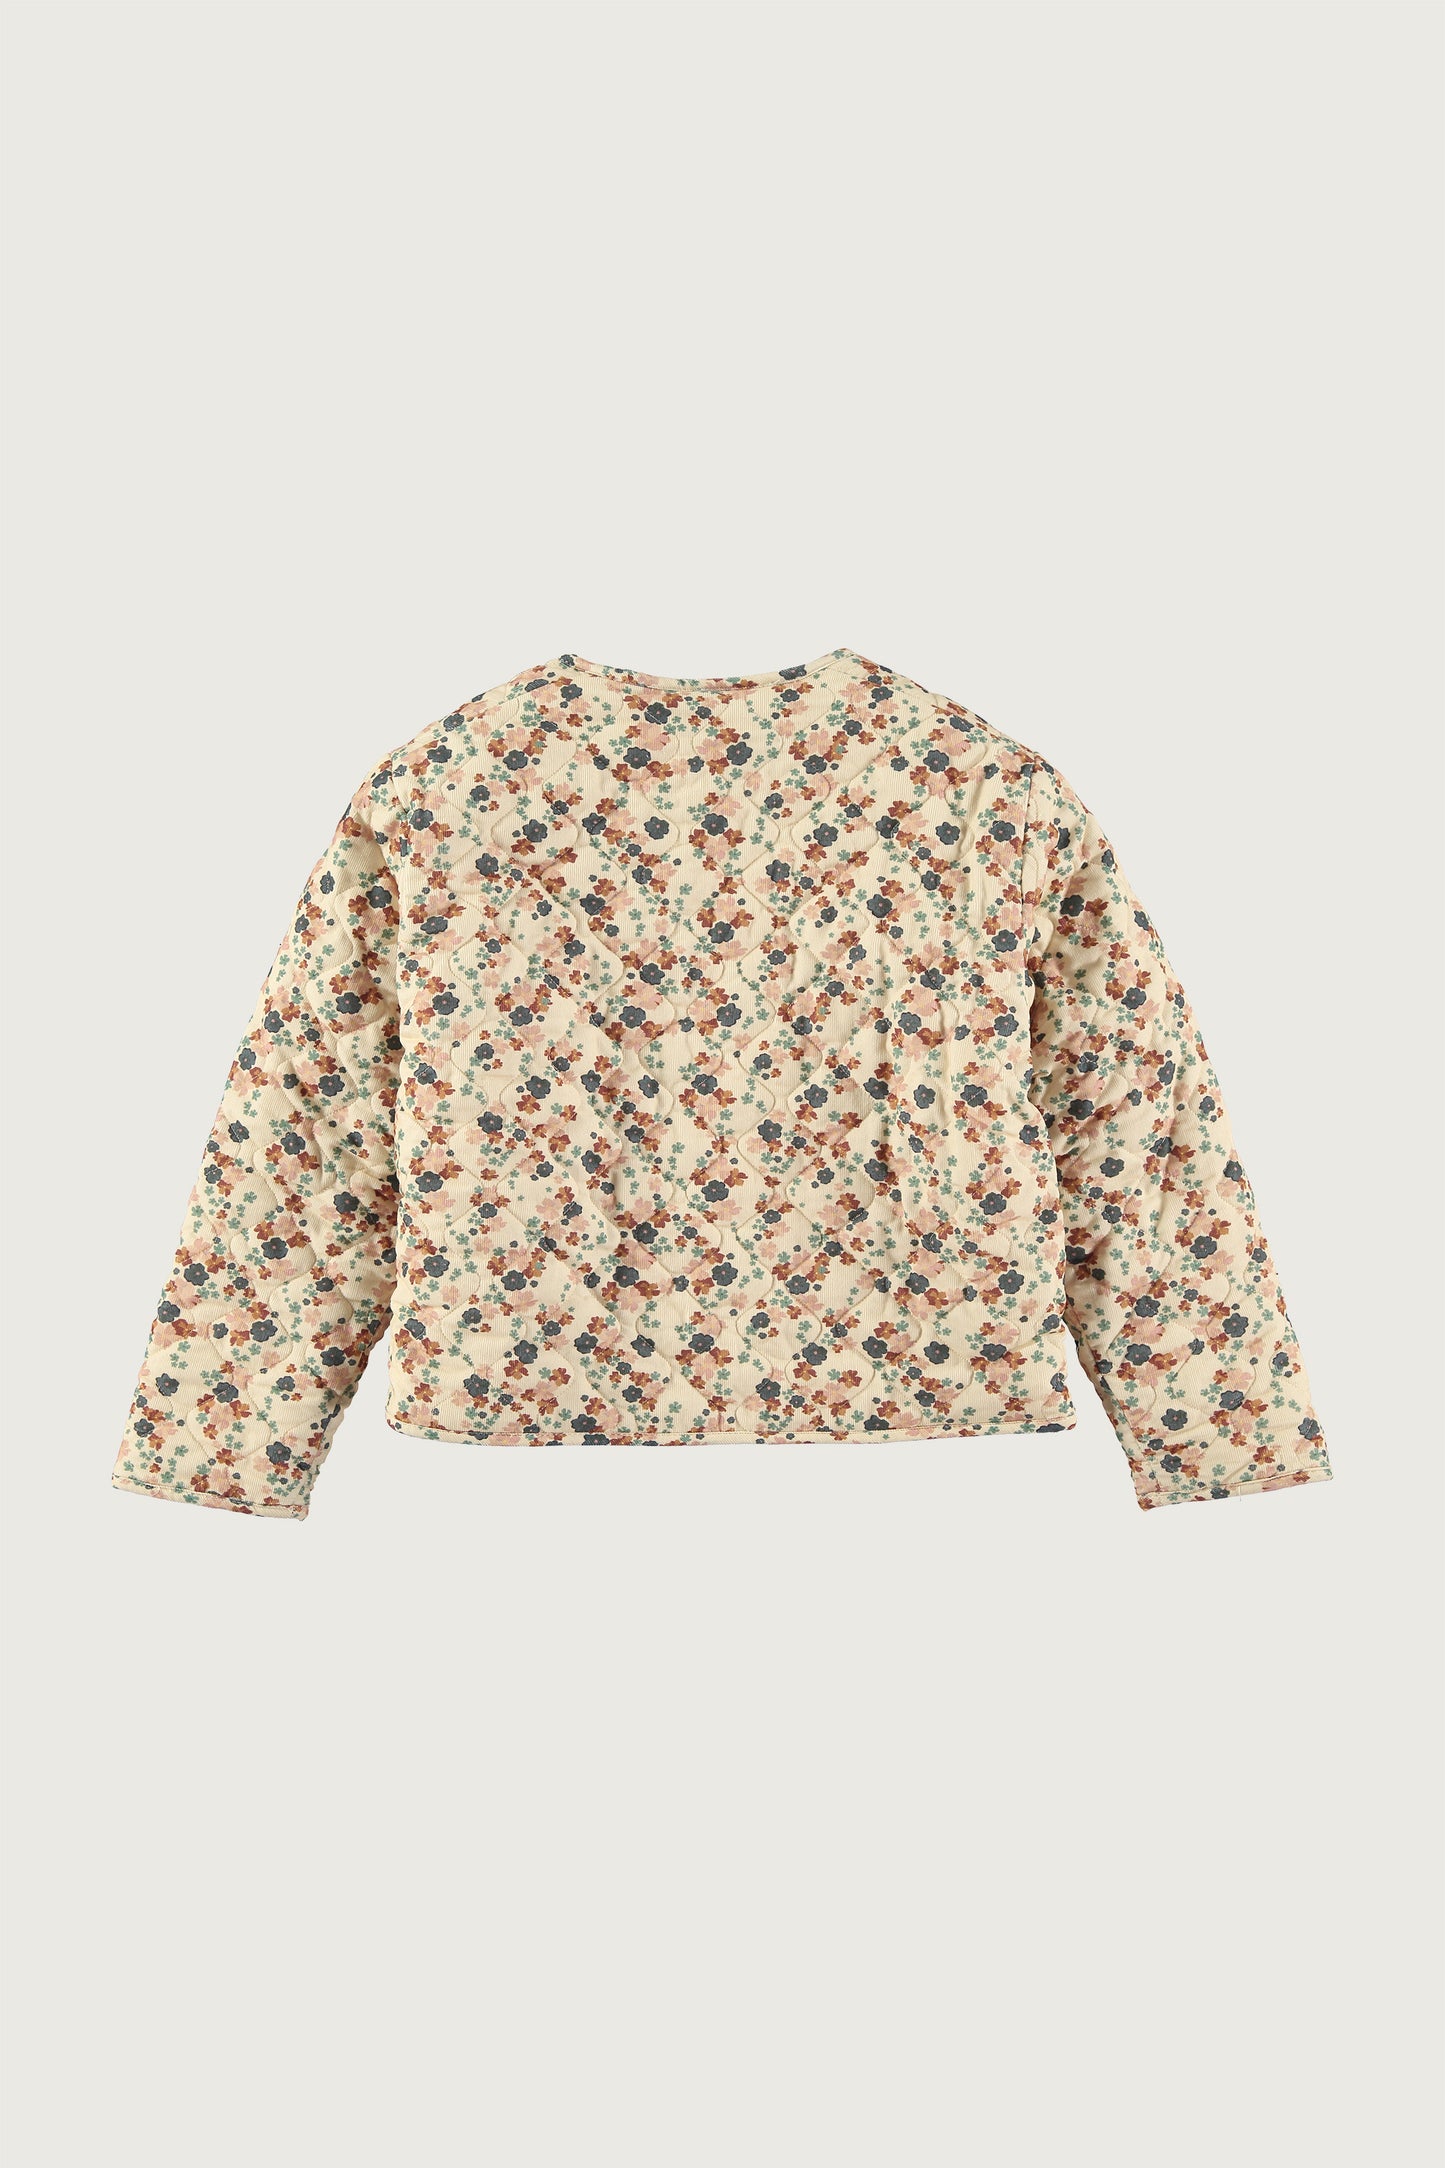 Coco Au Lait NUDE WILD FLOWERS QUILTED BABY JACKET  Nude Wild